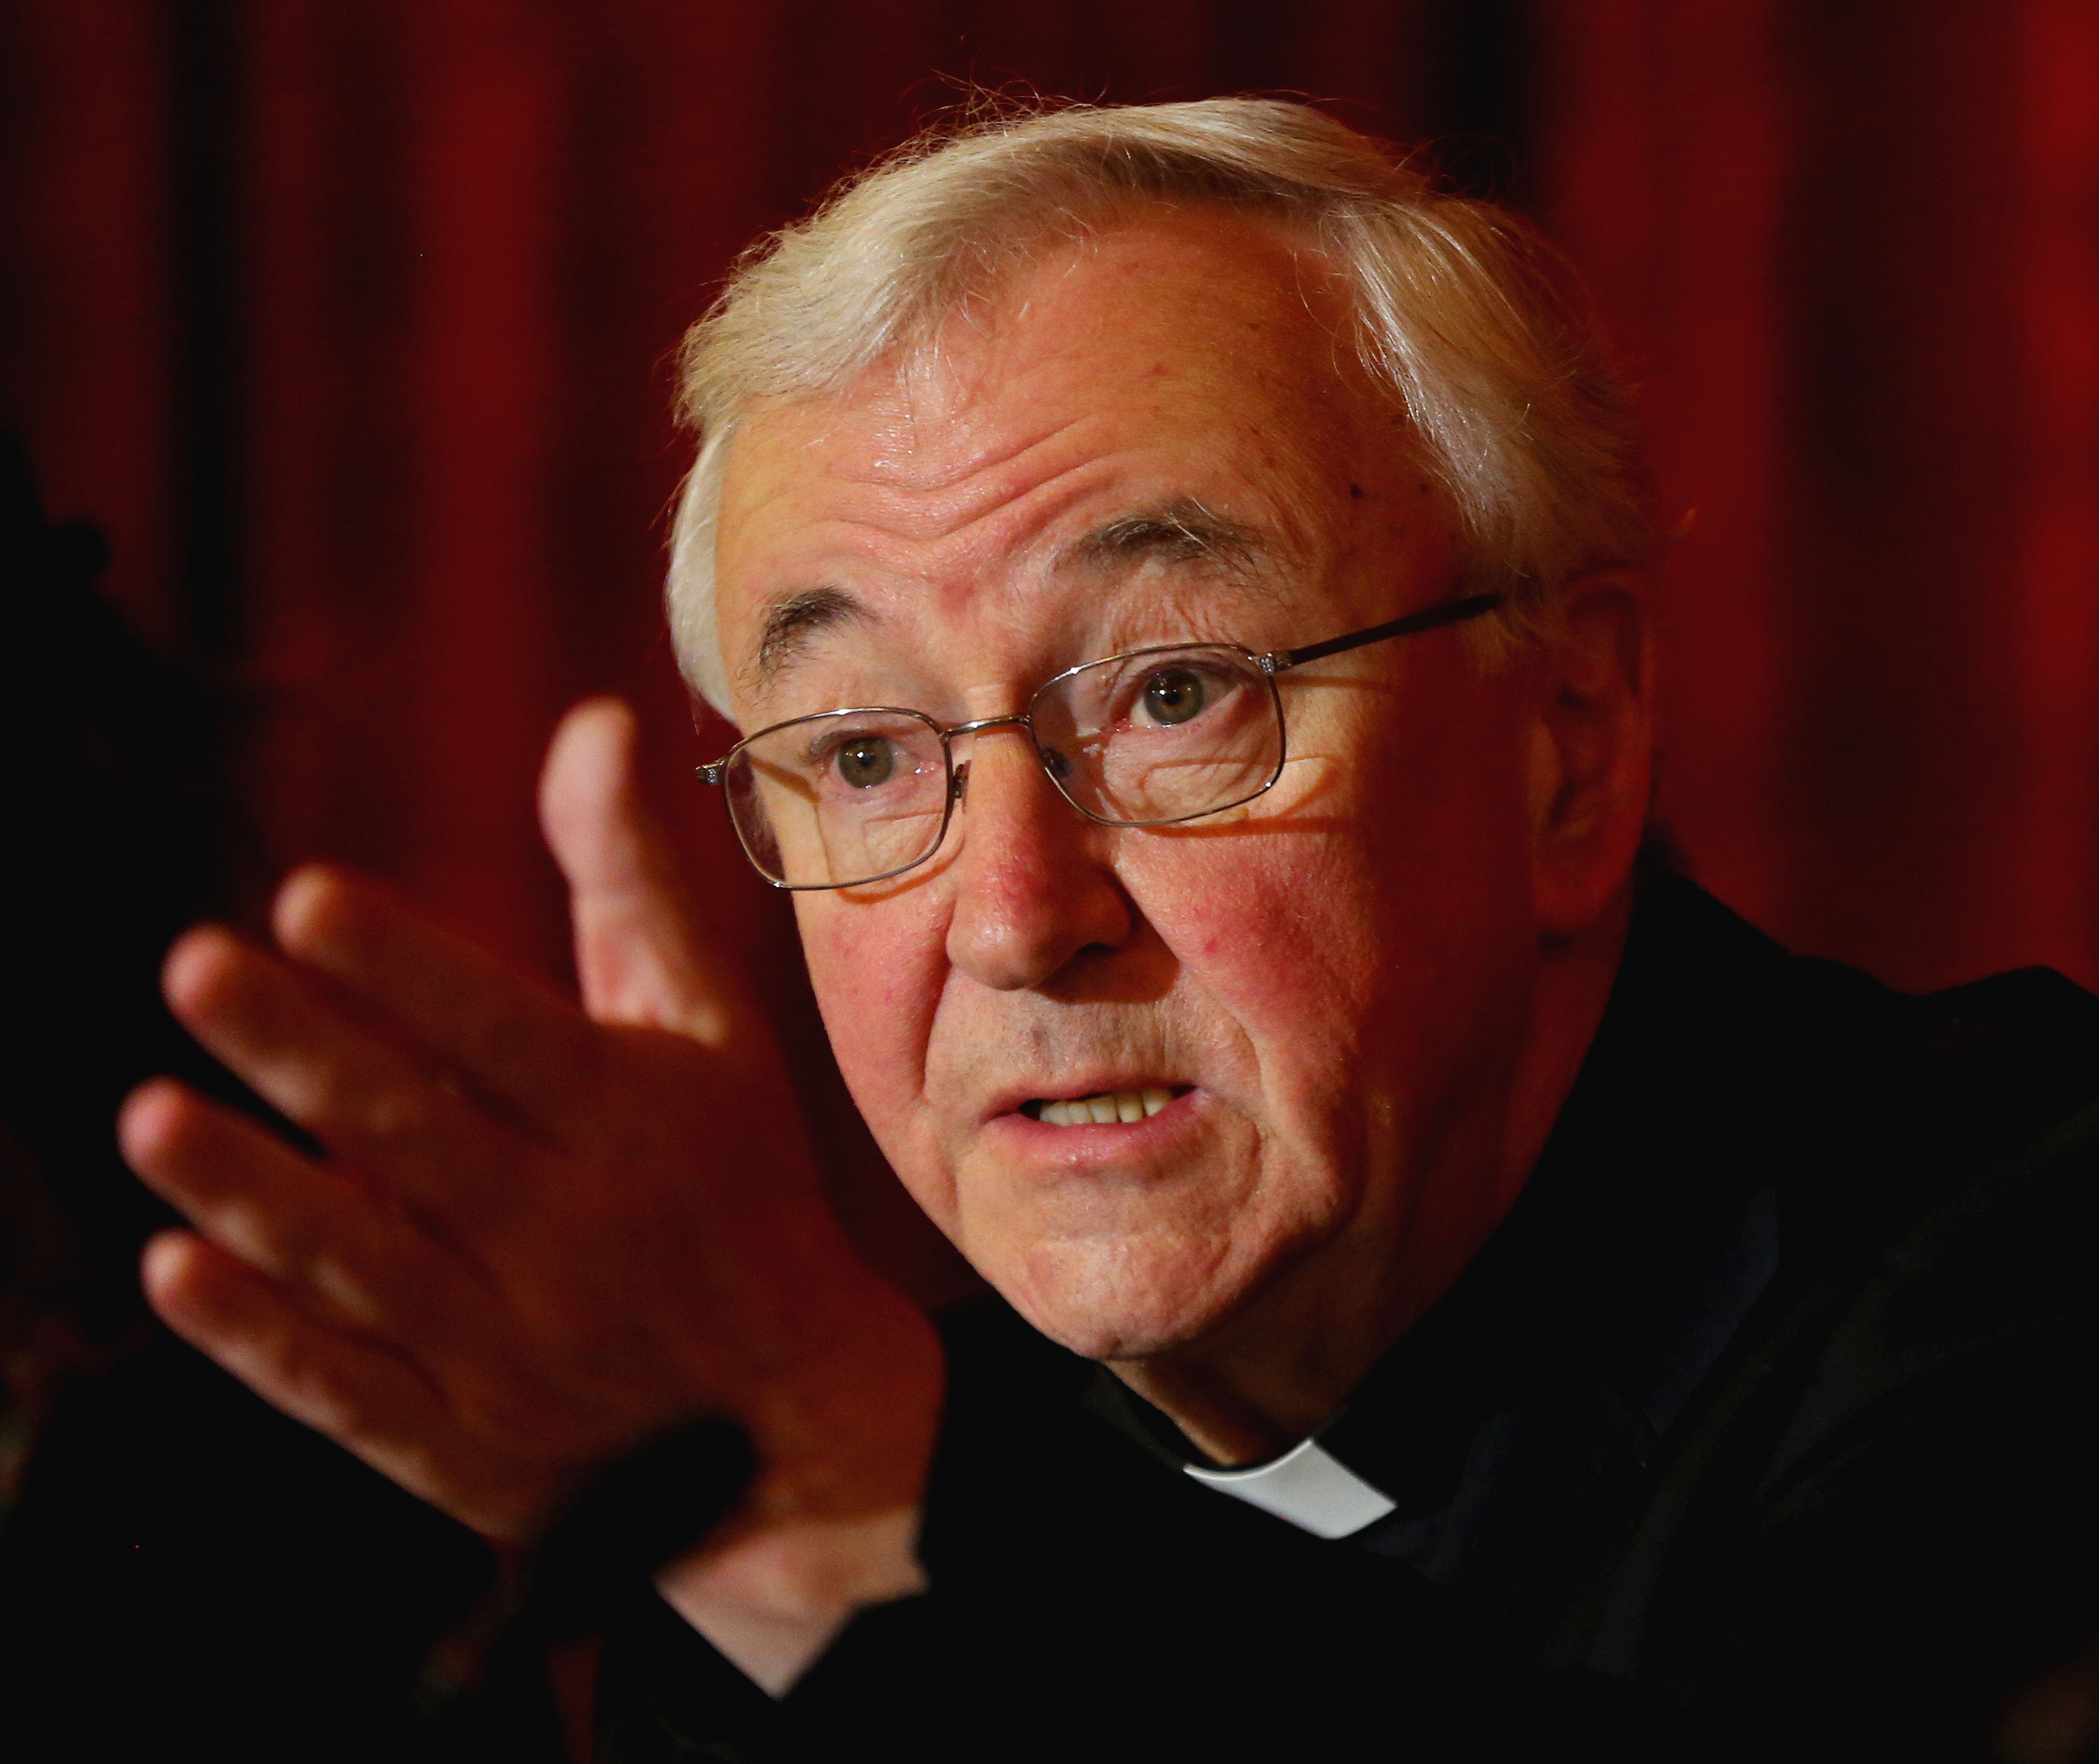 Cardinal addresses headteachers on ‘great confusion’ of gender identity 